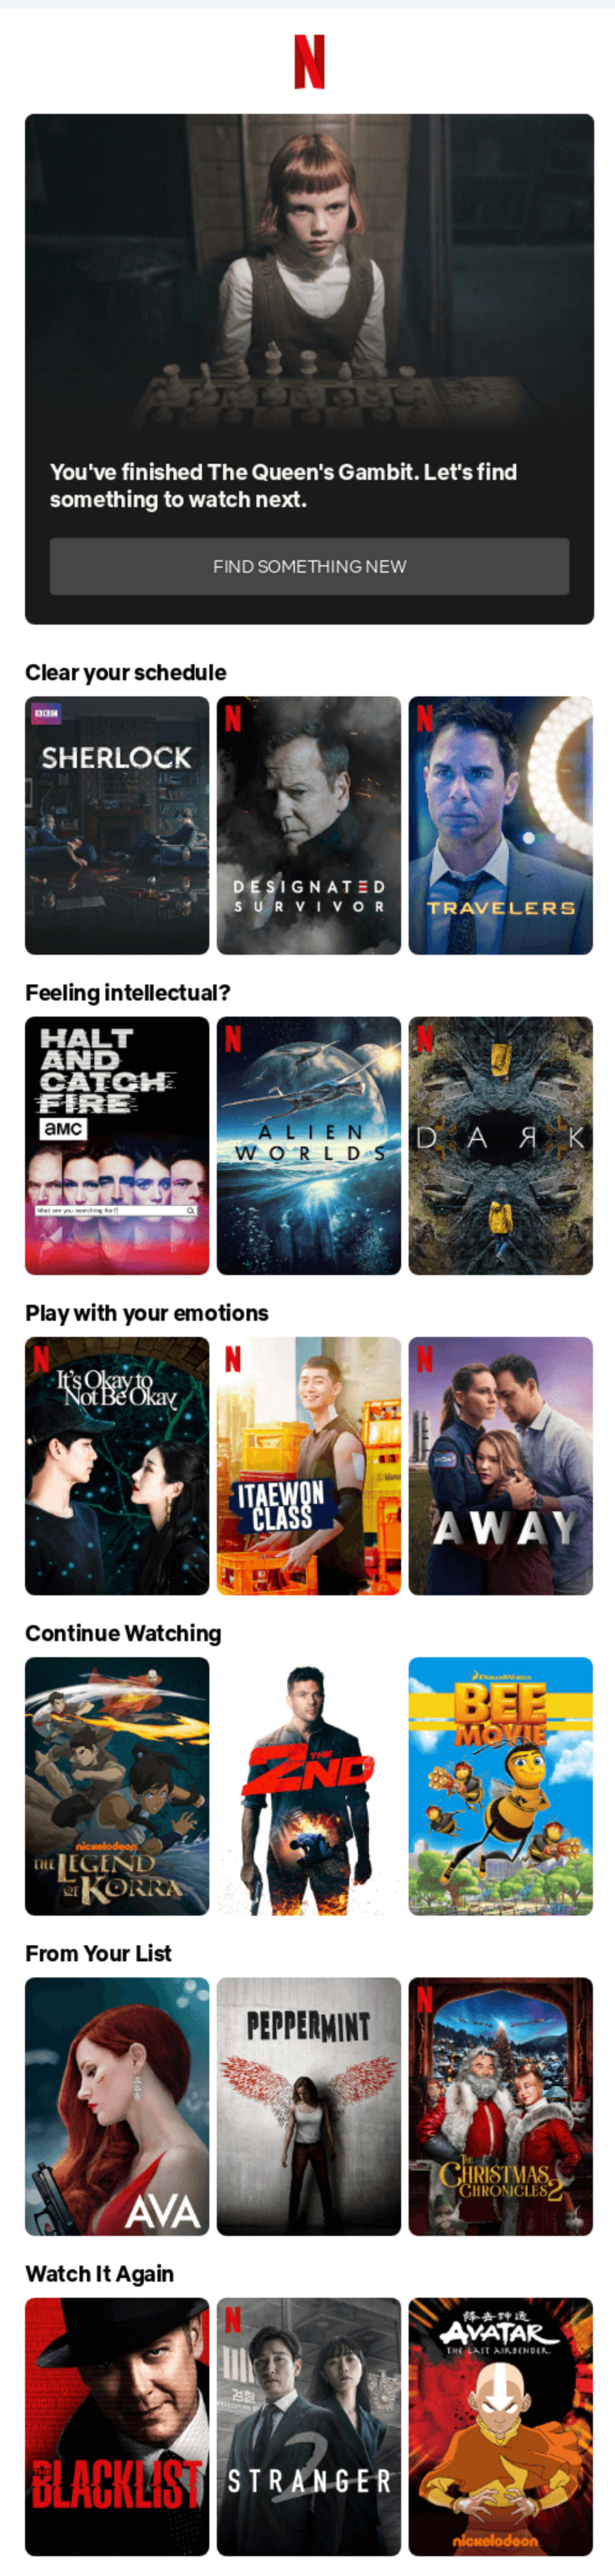 Netflix Recommendations use Human-First Data